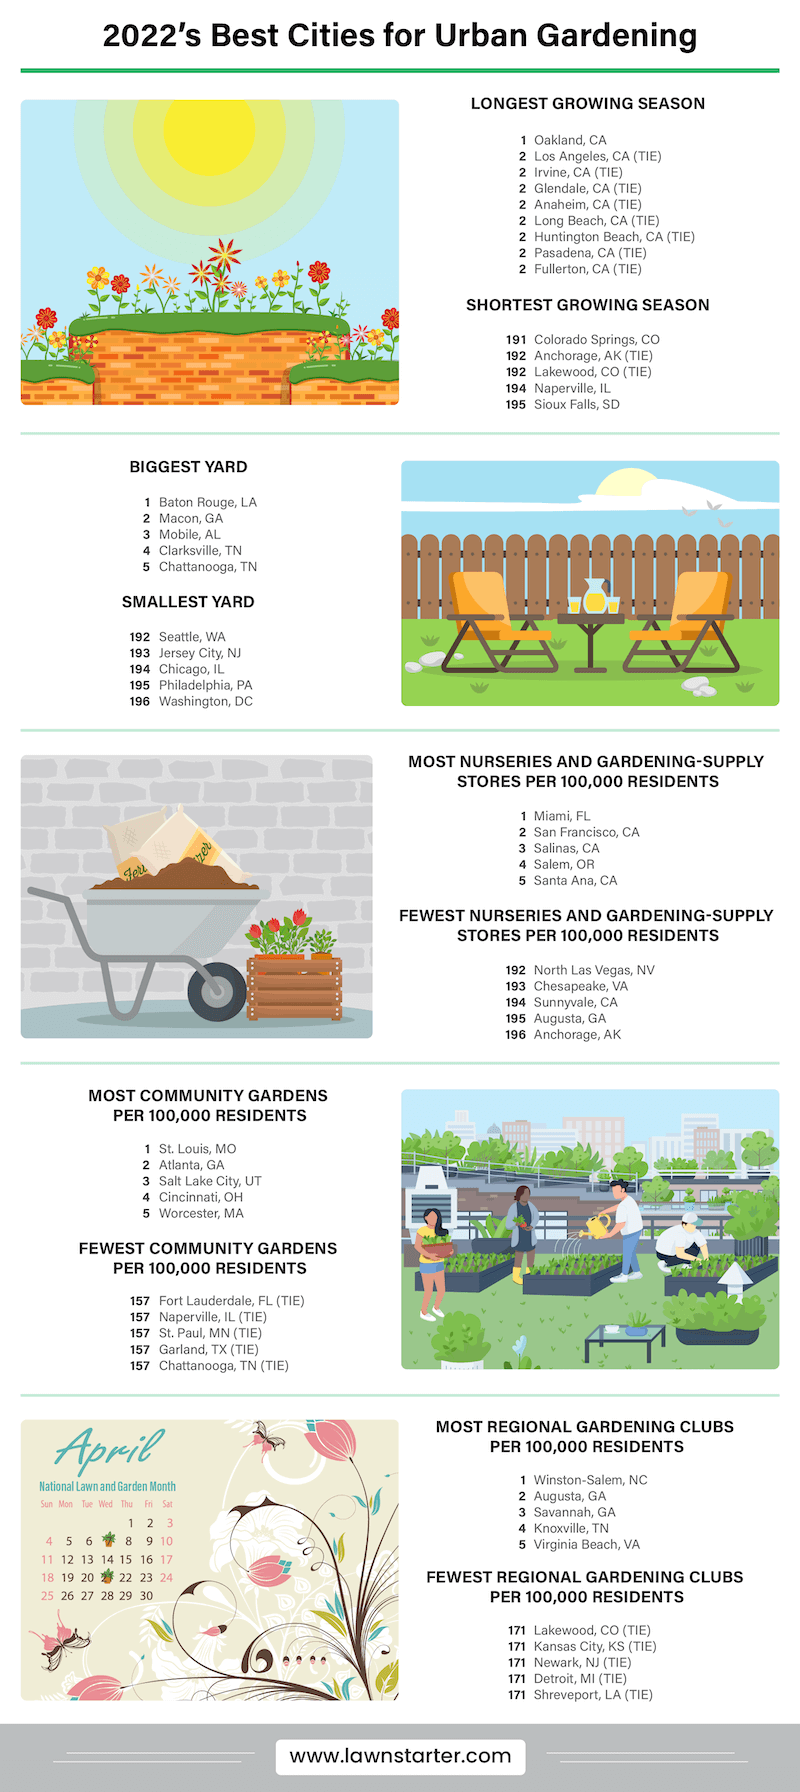 Infographic showing the best and worst cities for urban gardening, a ranking based on access to gardening spaces, length of each city's growing season, climate, and gardening communities